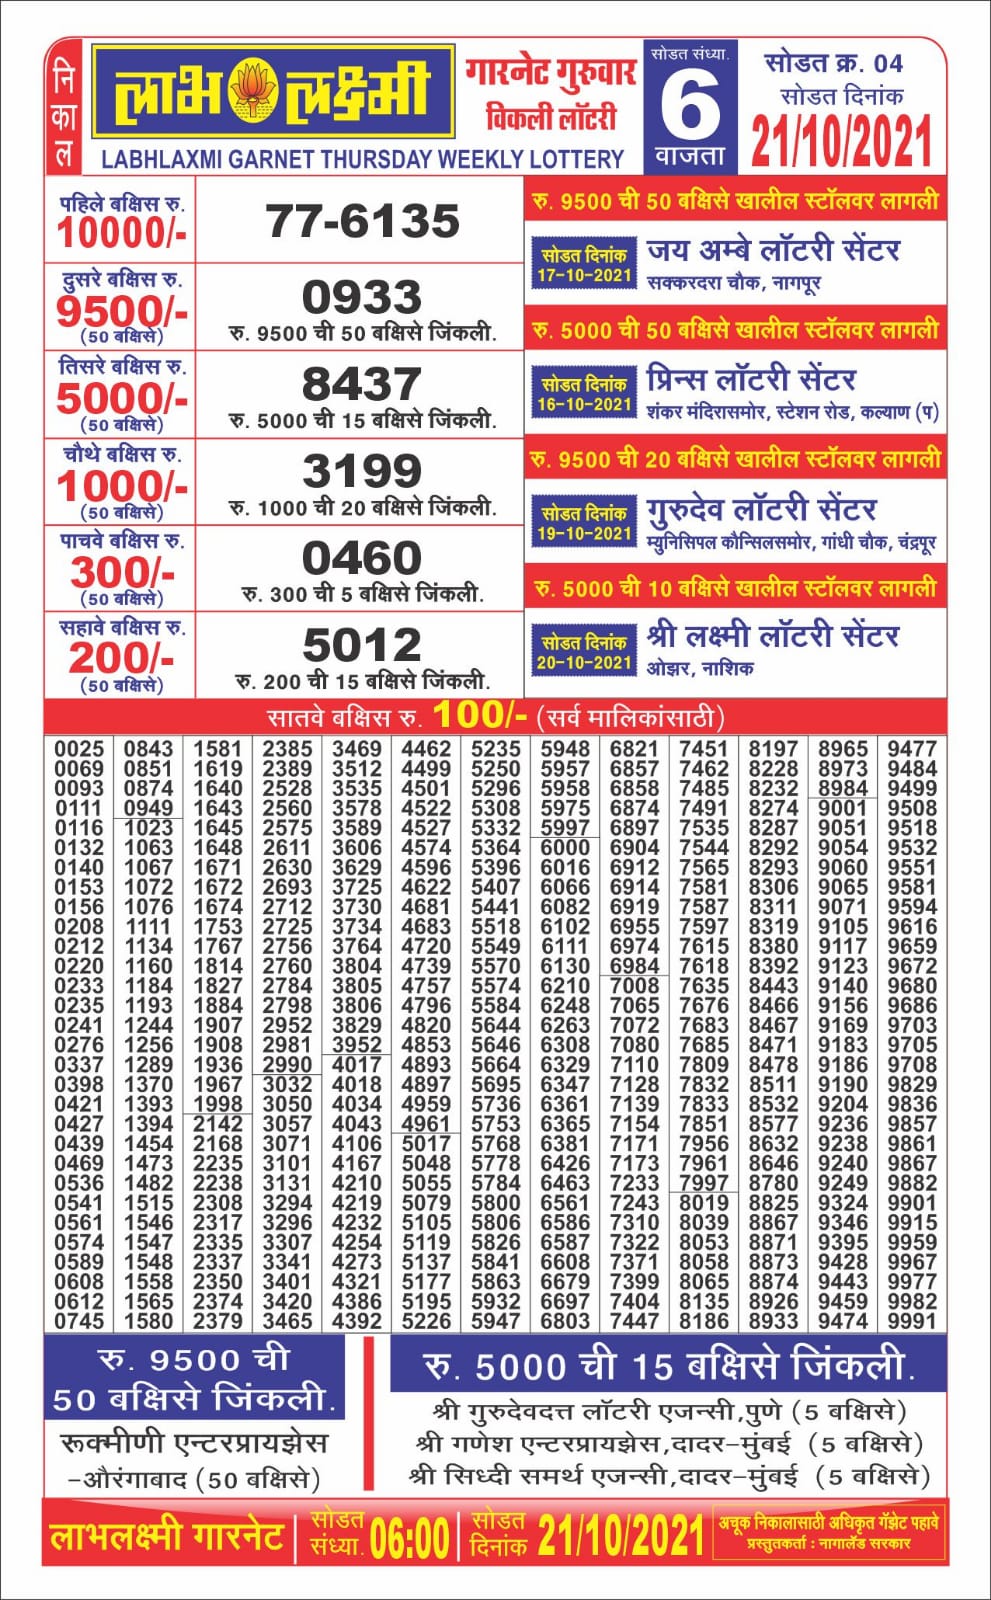 Labhlaxmi 6pm Lottery Result 21.10.2021